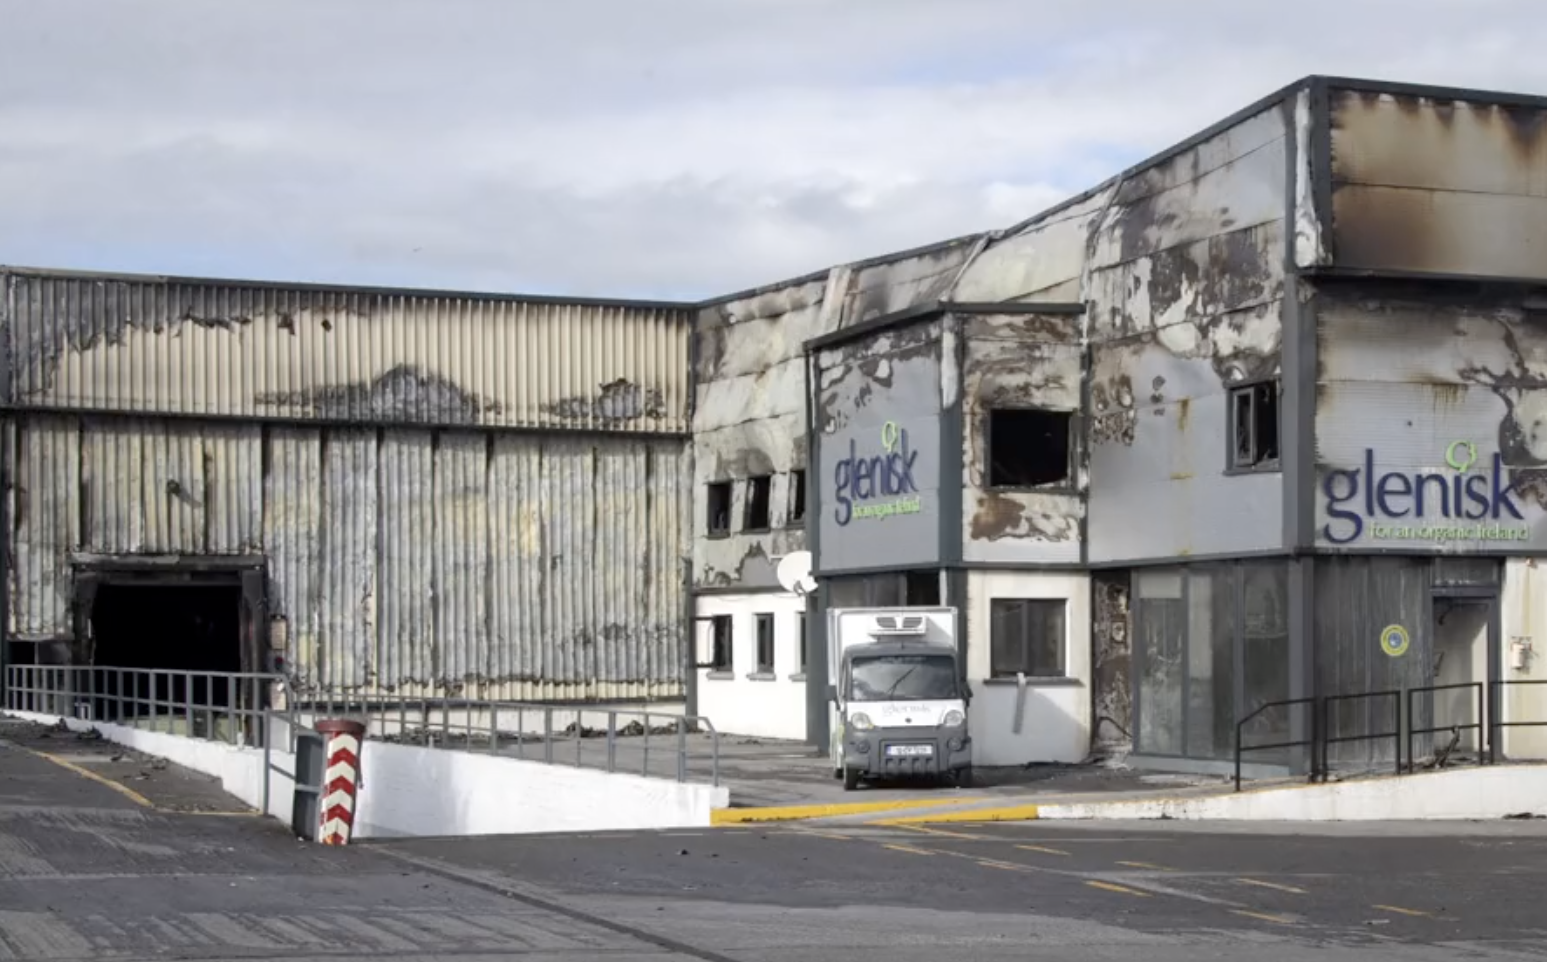 ‘And just like that…’ Glenisk reopens for business four months after factory fire